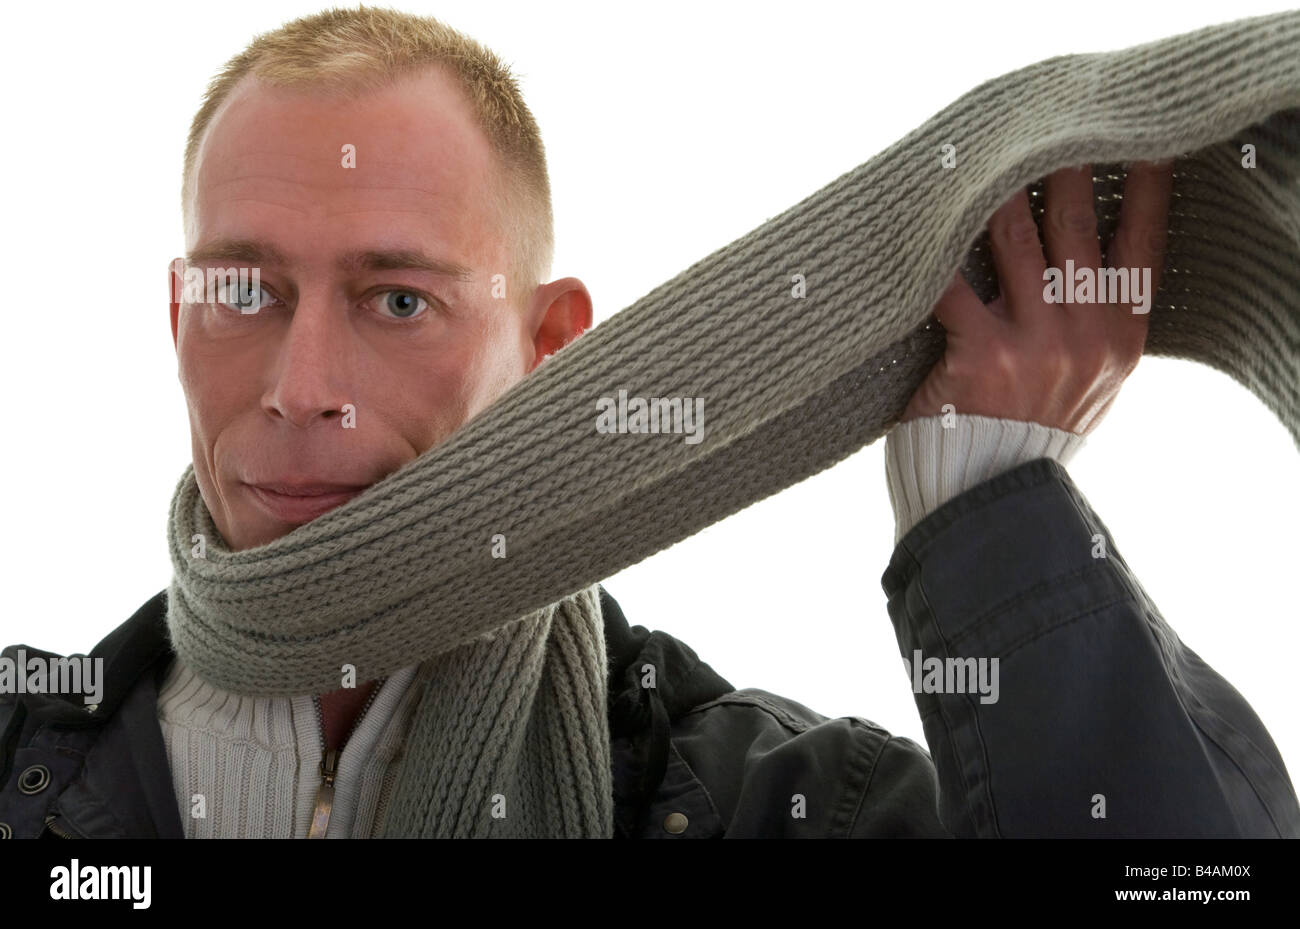 man with scarf Stock Photo